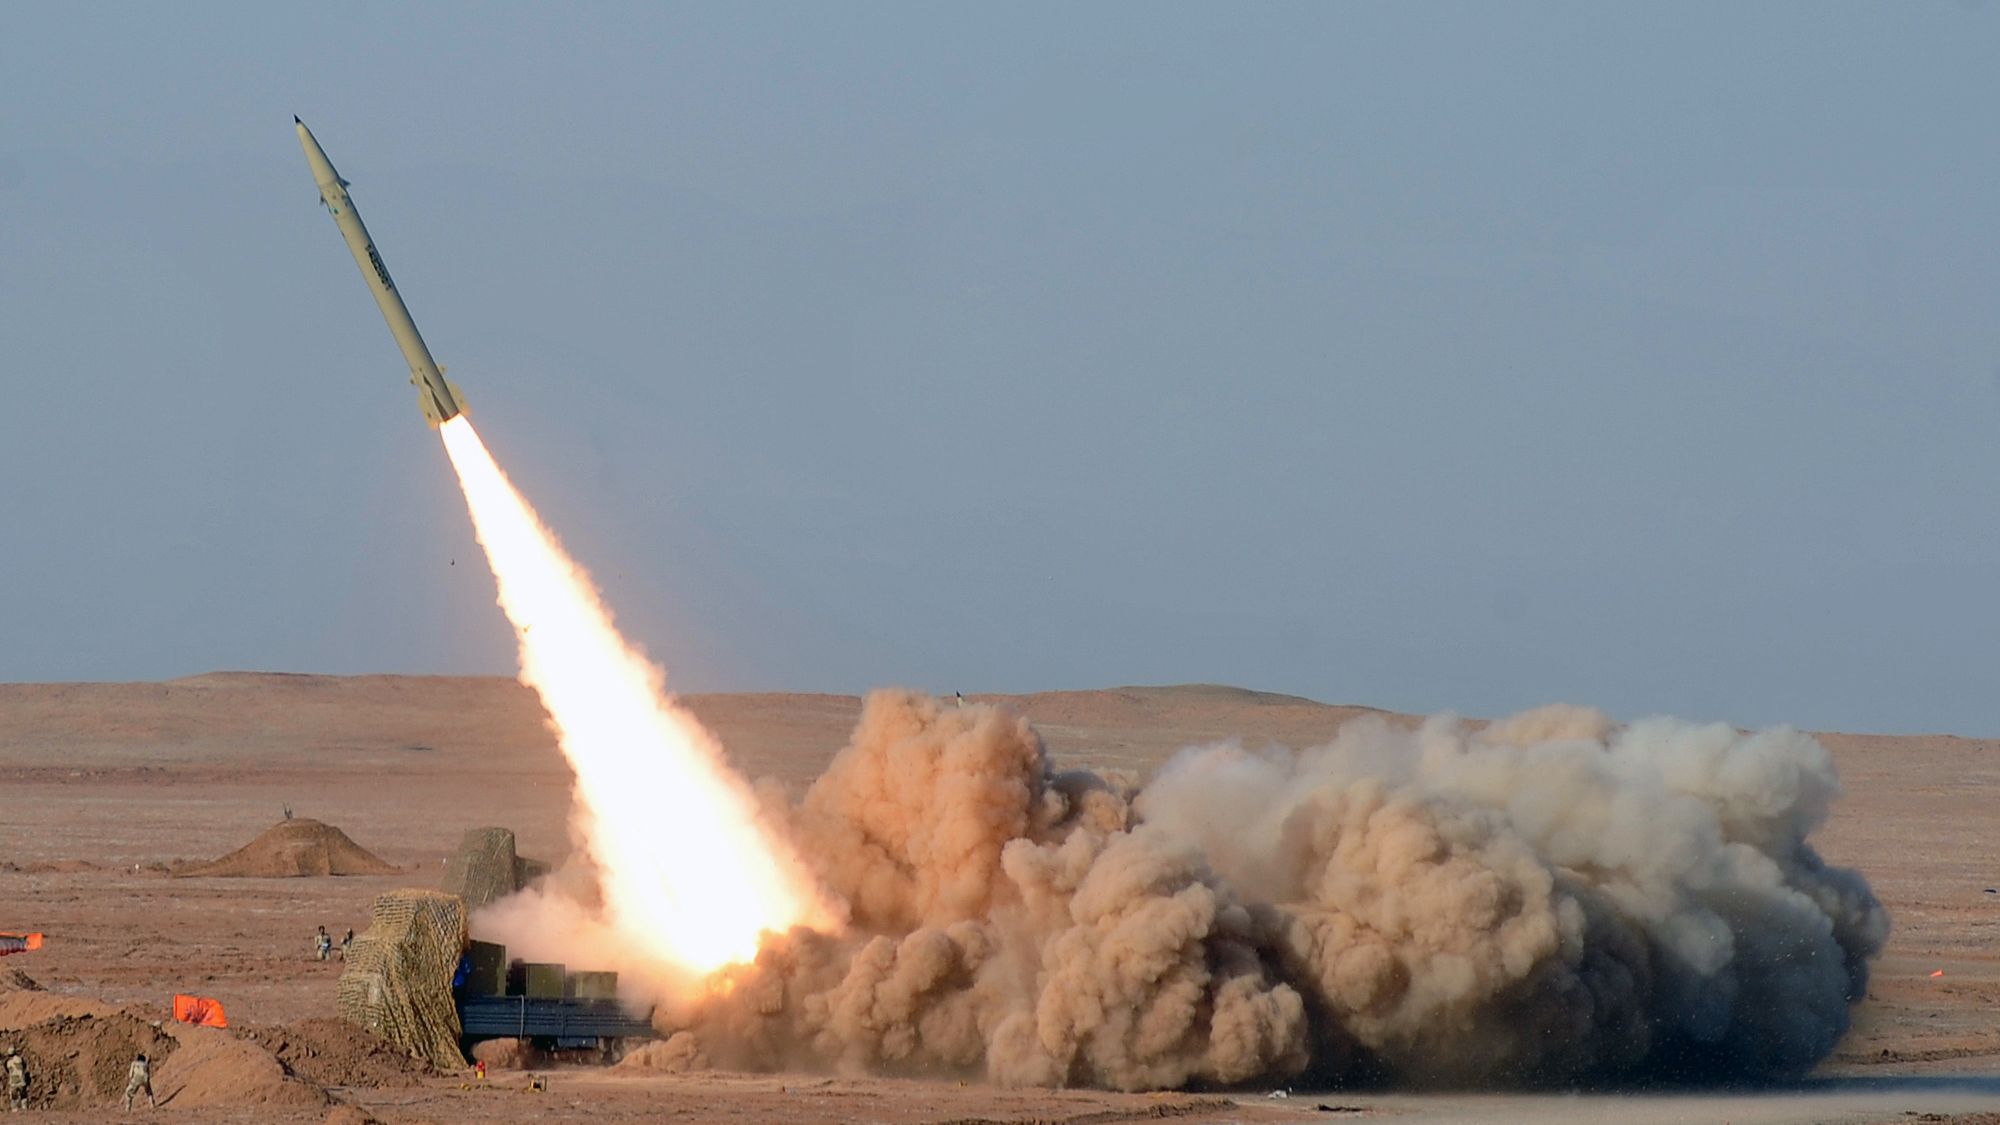 Iranian short-range missile (Fateh) launched during the second day of military exercises, in Iran's Kavir Desert, July 3, 2012.